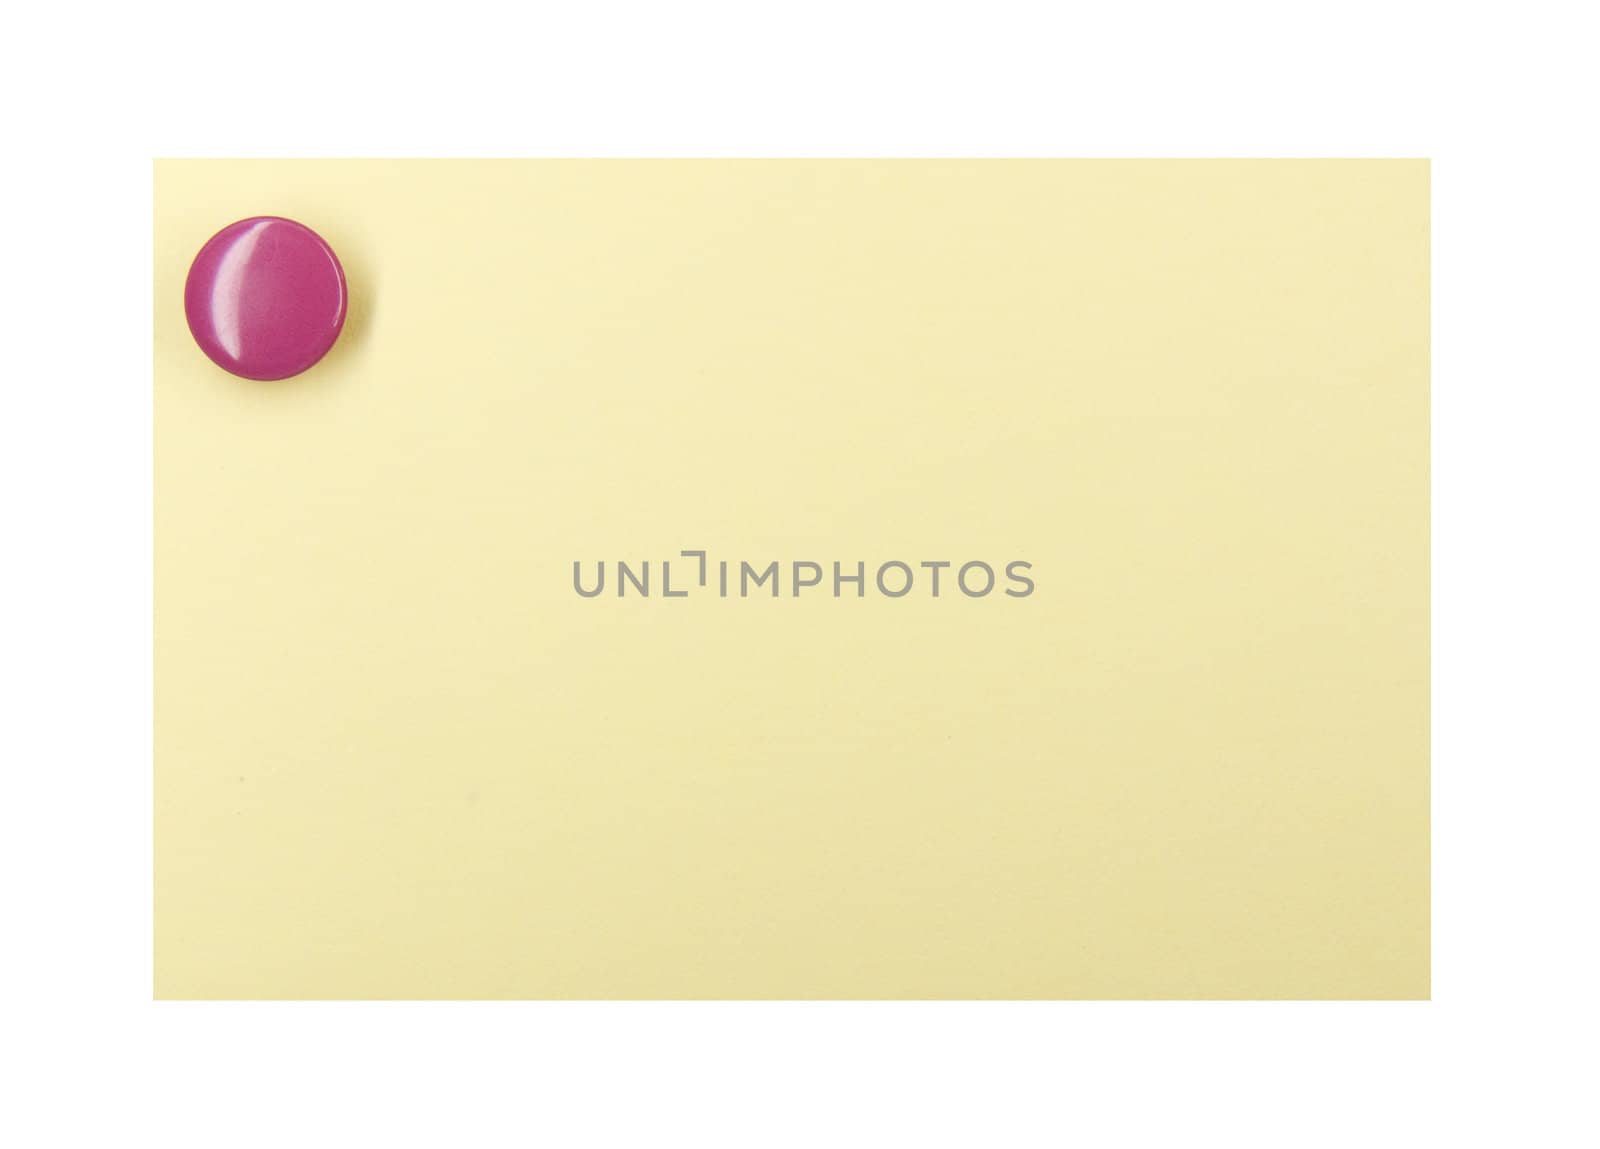 Purple pushpin holding up a yellow note on a white background